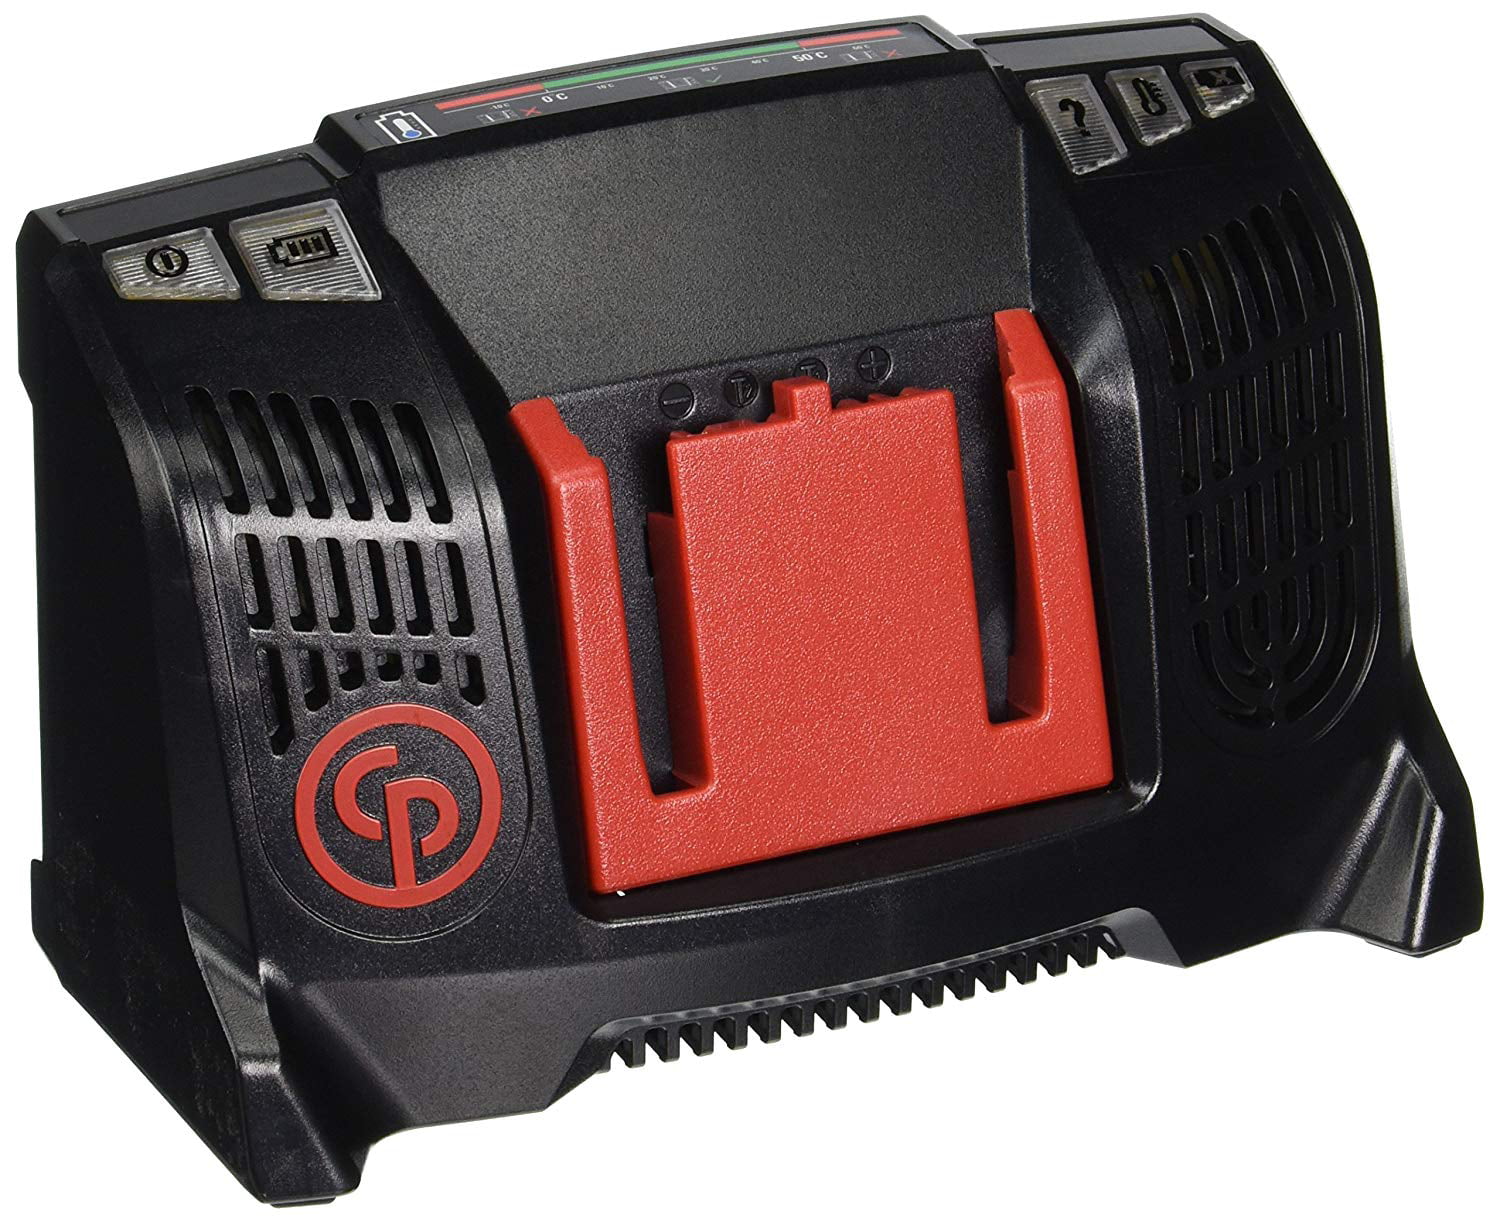 Chicago Pneumatic CP20CHU 20V Batter Charger for CP Cordless Red Black